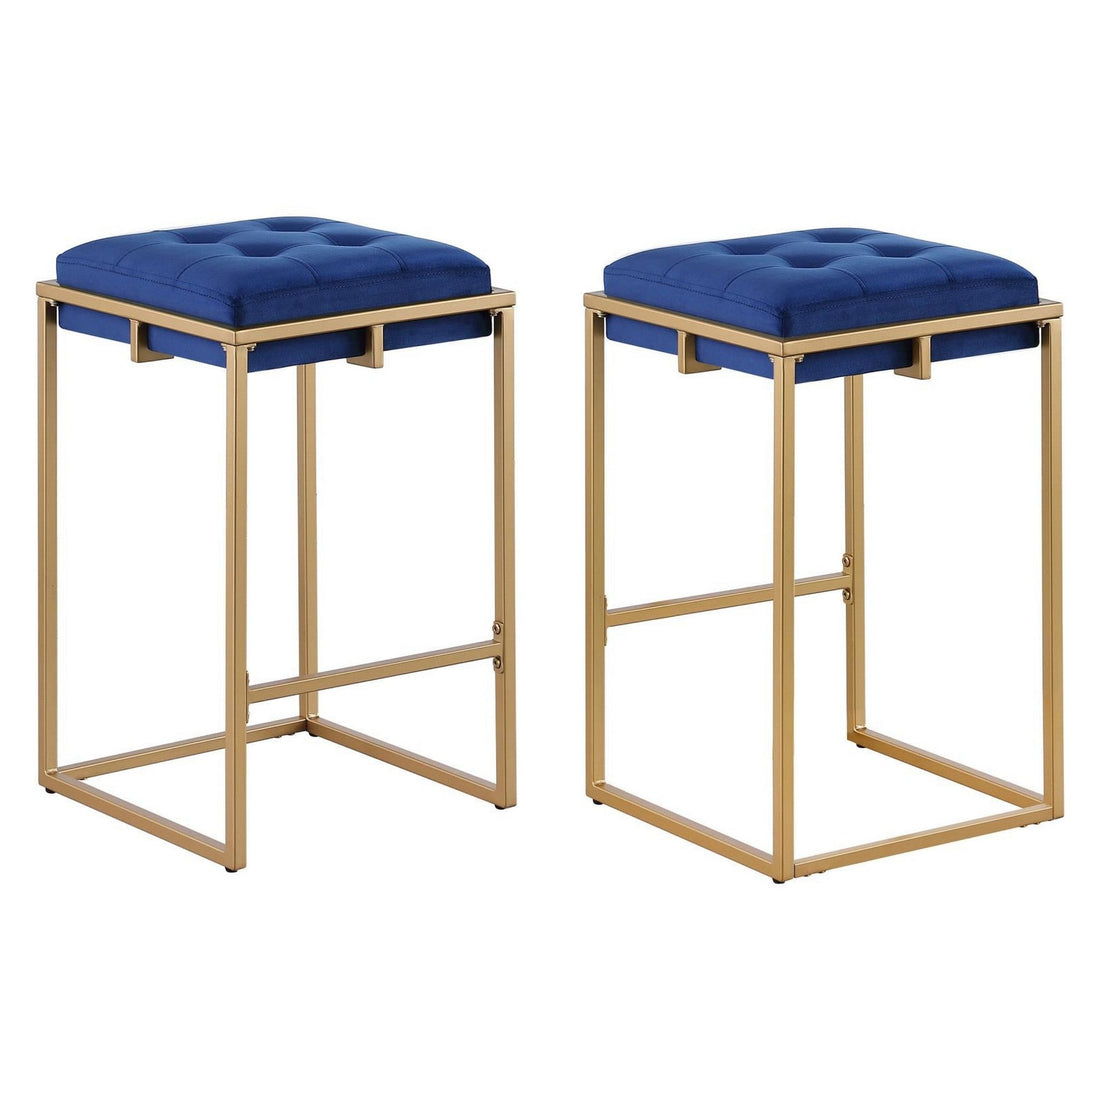 Nadia Square Padded Seat Counter Height Stool (Set of 2) Blue and Gold 183649